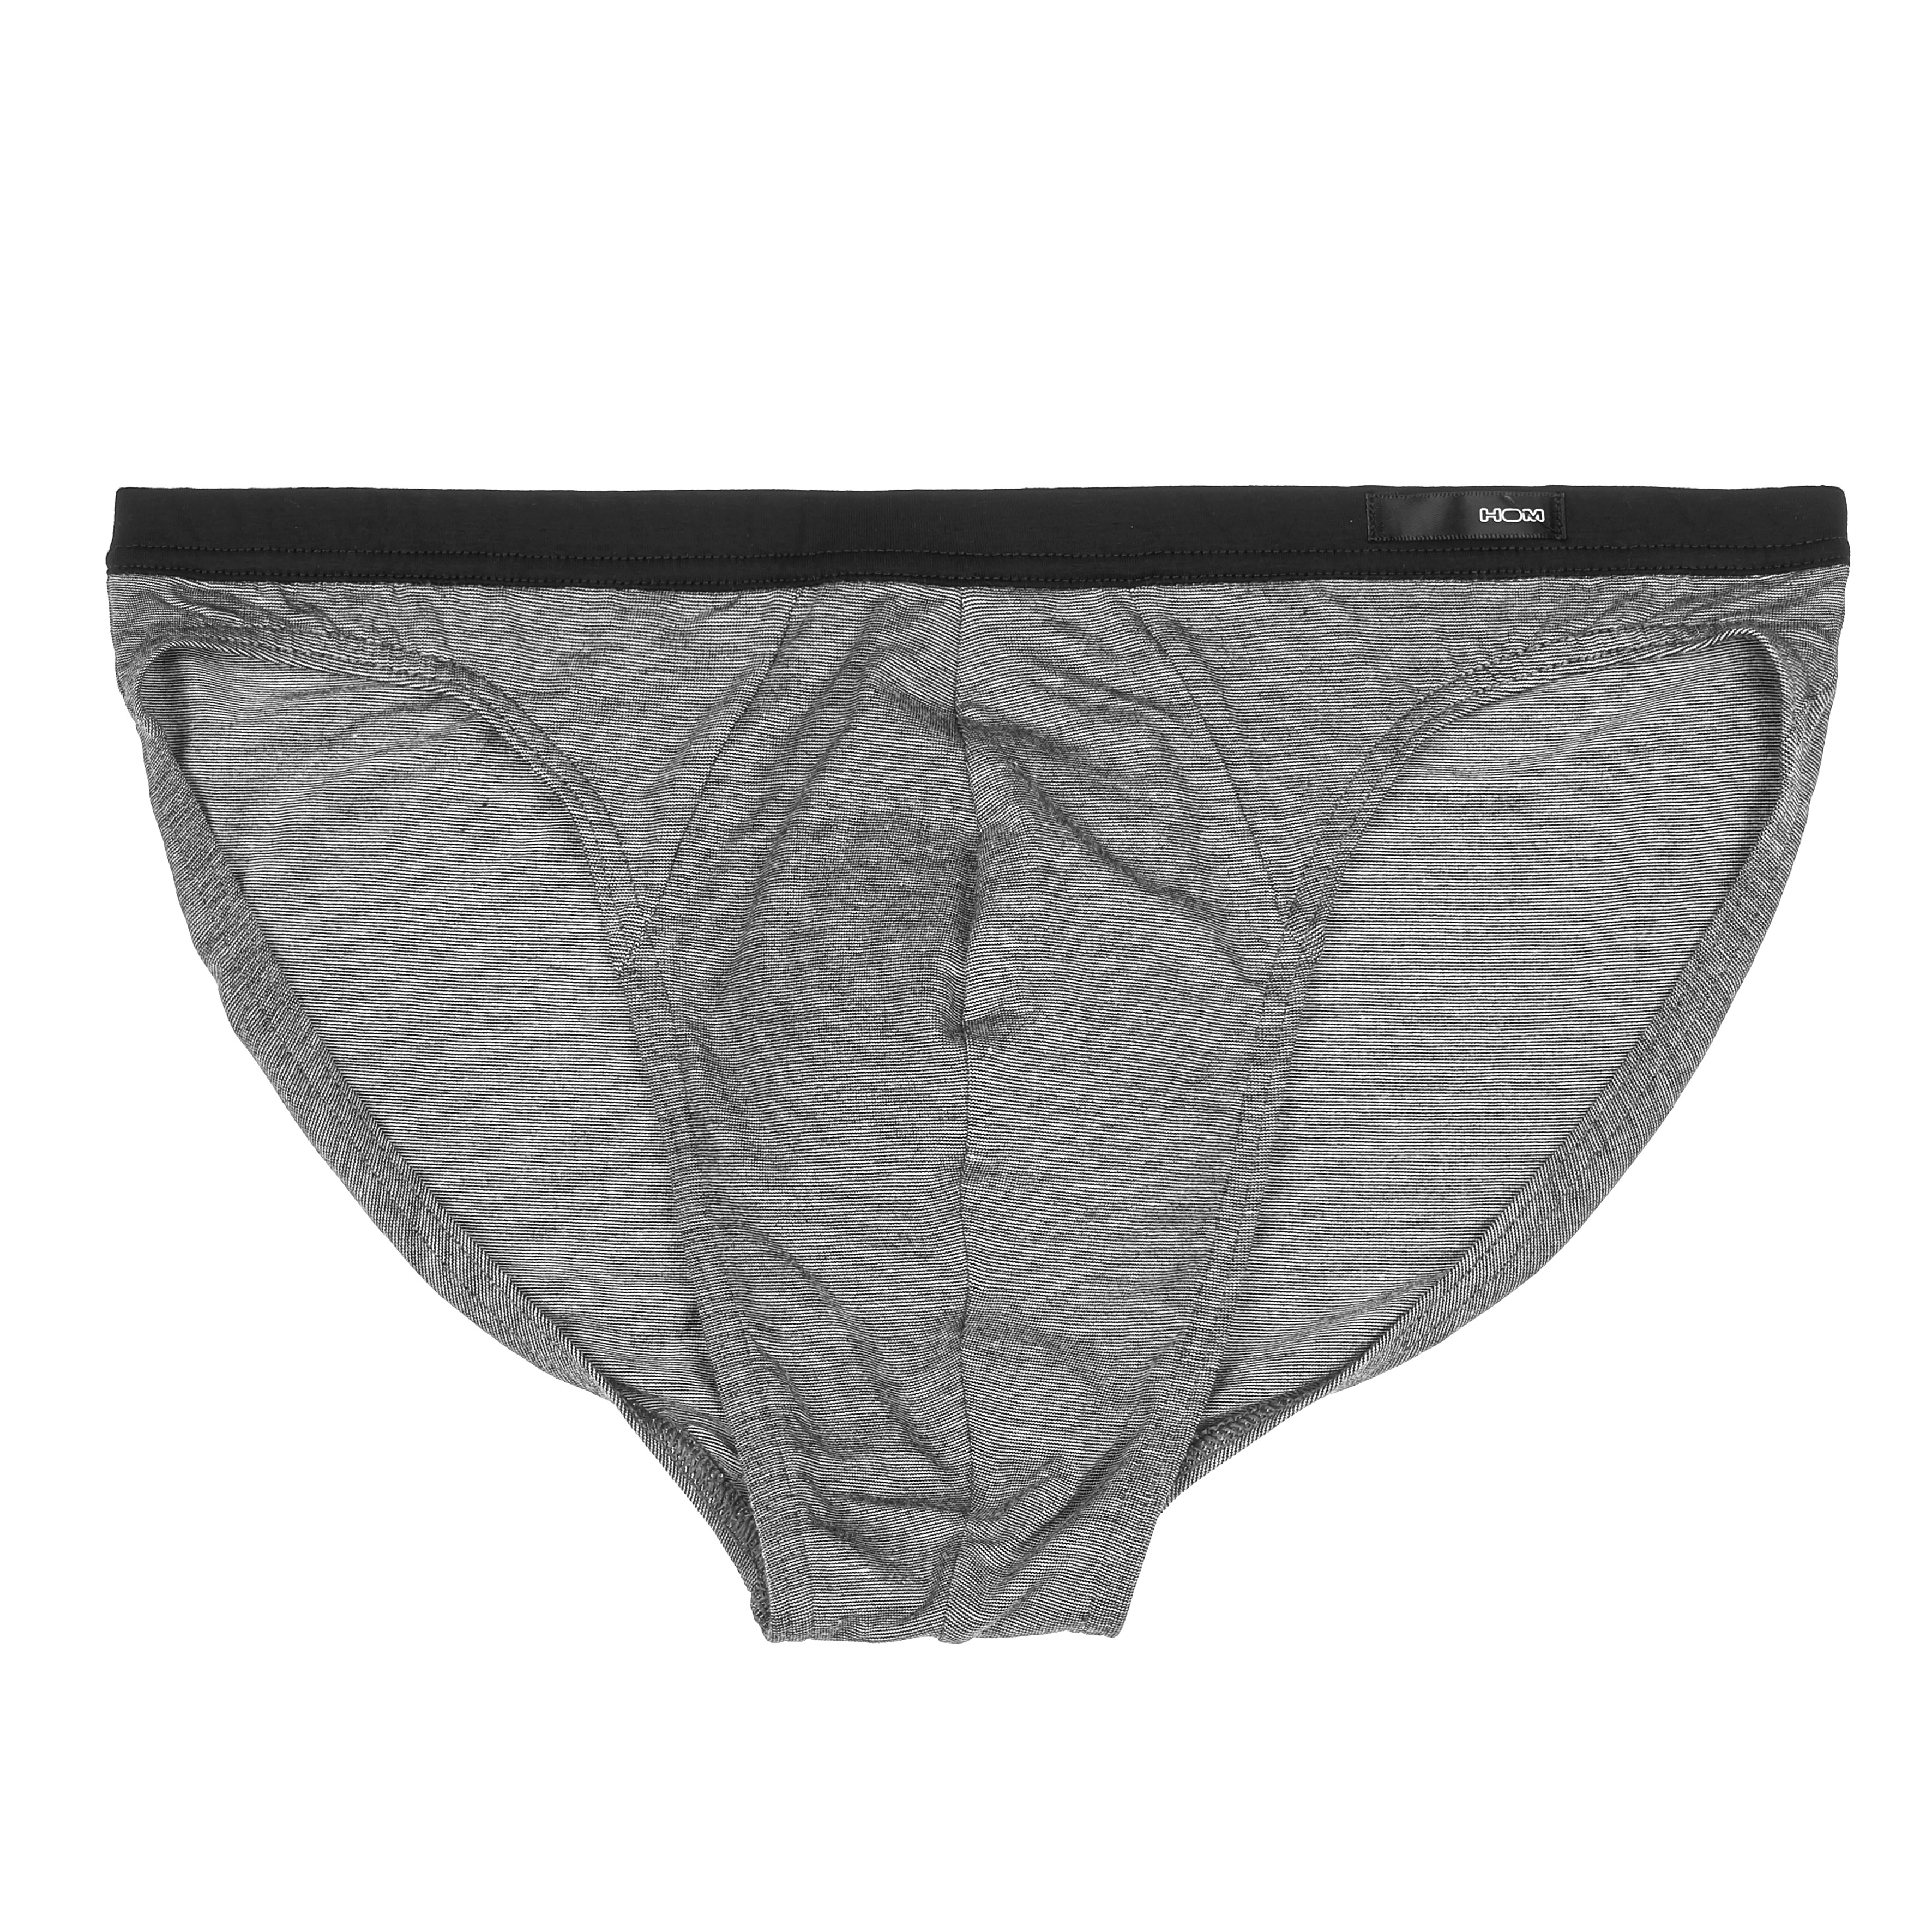 Gallant Micro Slip: Briefs for man brand HOM for sale online at lun...